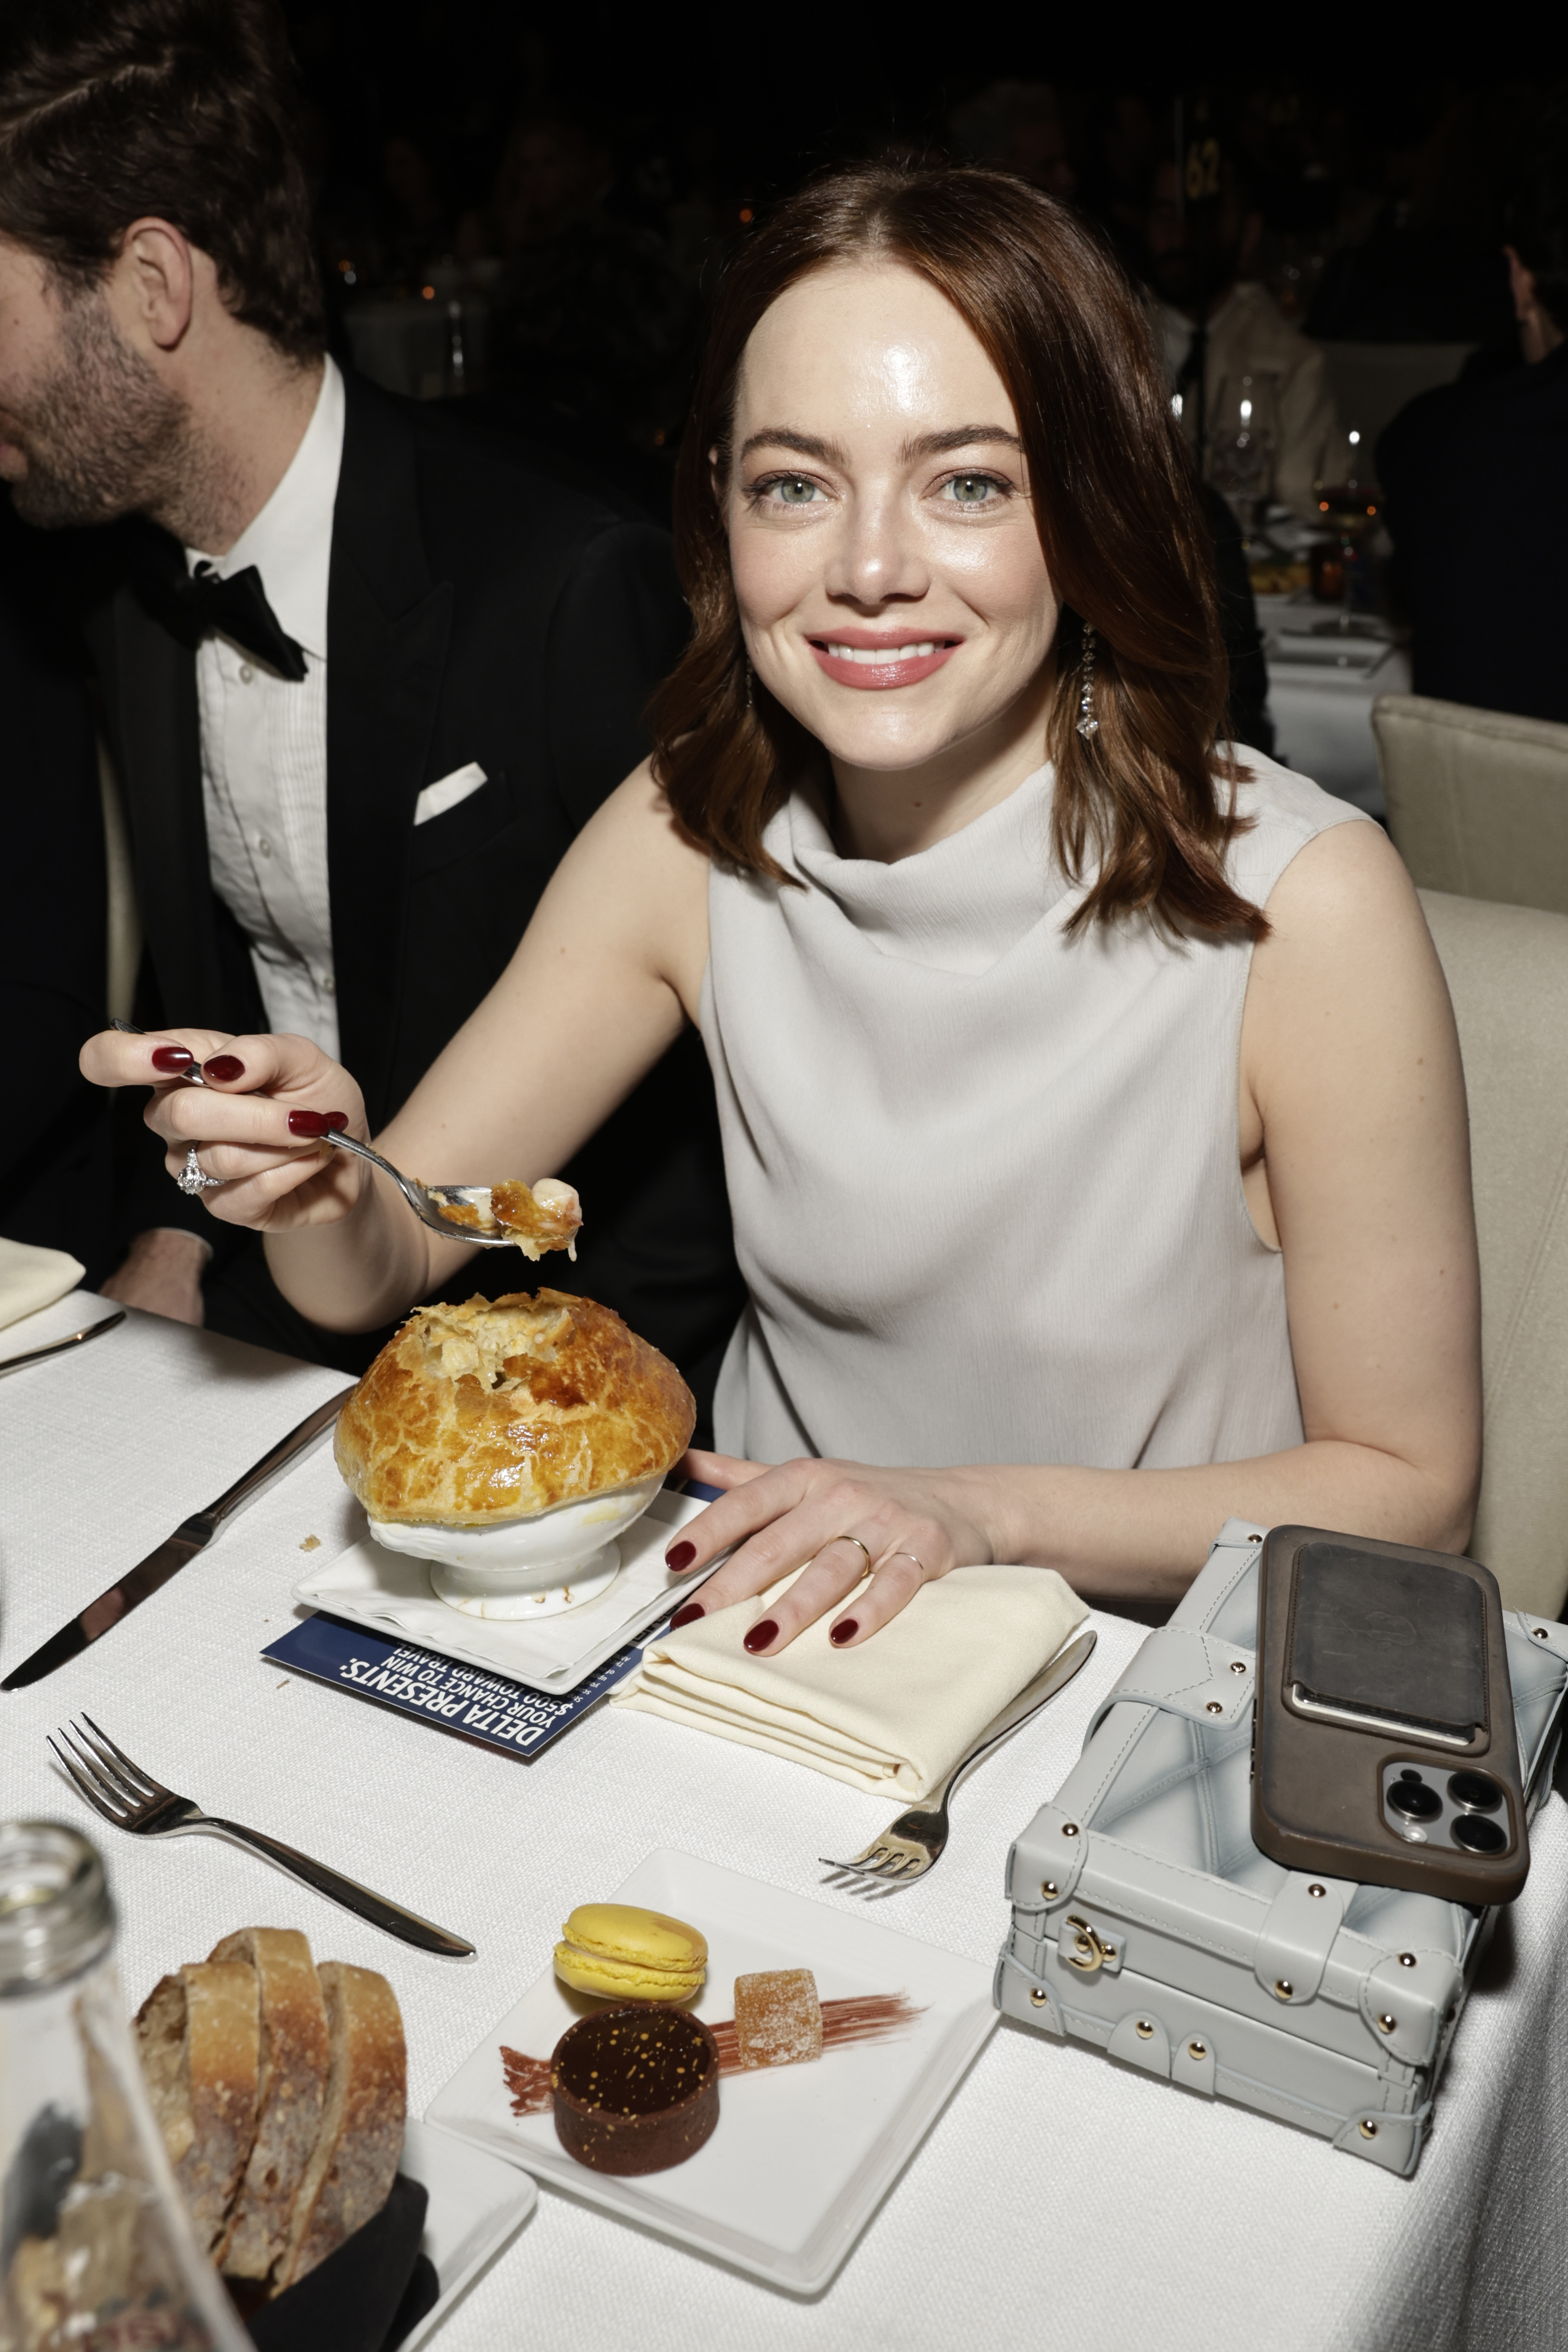 Emma in a sleeveless dress at a table with a pot pie, smiling at the camera